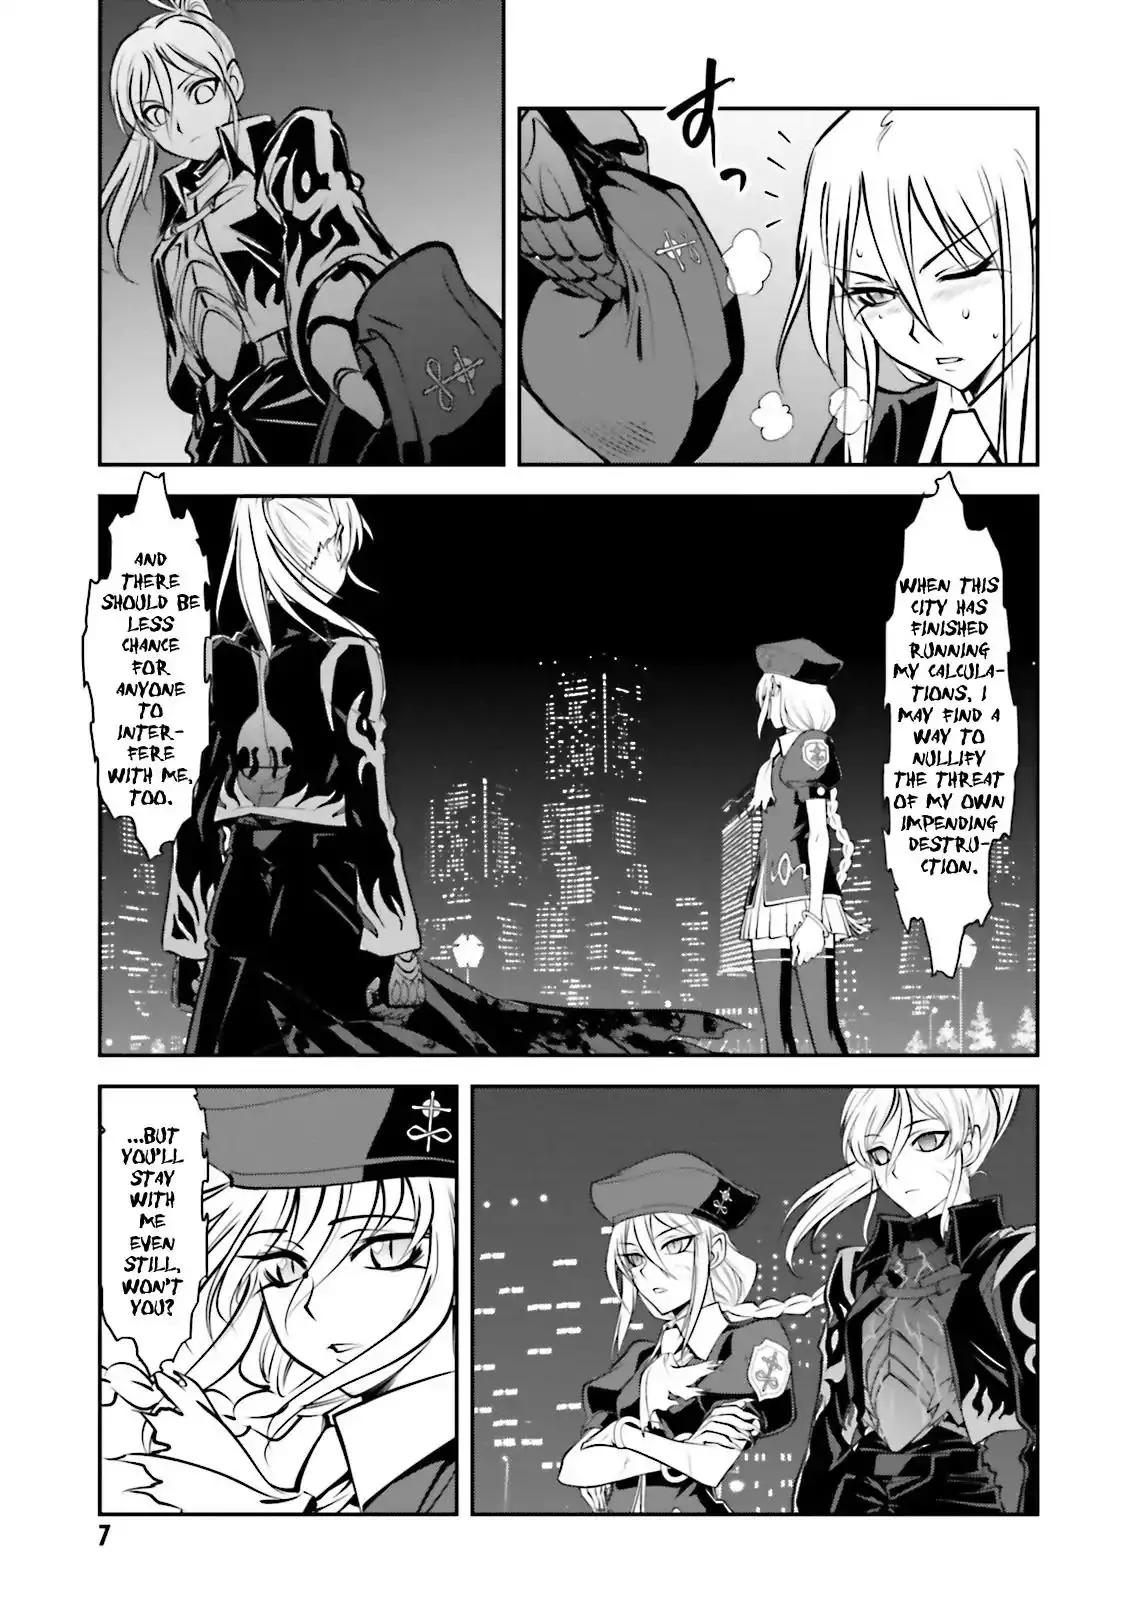 Melty Blood - Back Alley Alliance Nightmare - 6 page 6